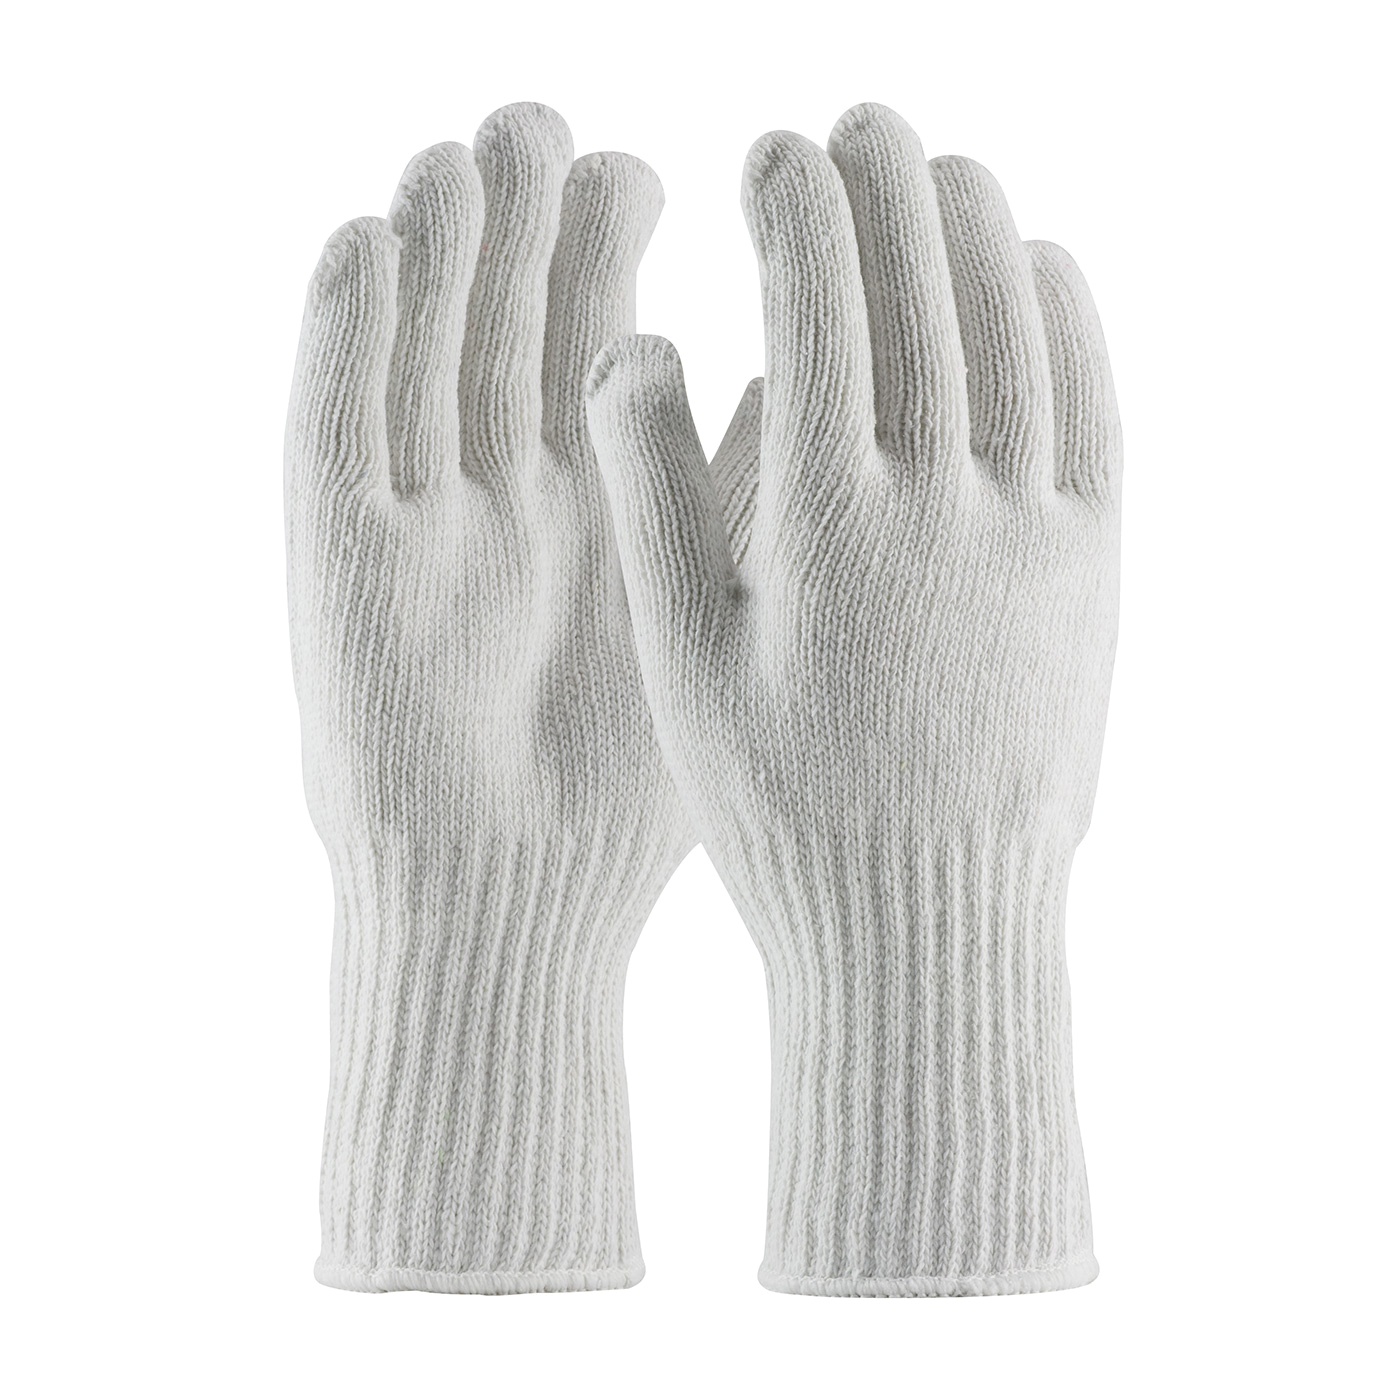 PIP® 35-CB604/L 35-CB604 Extra Heavyweight General Purpose Gloves, Full Finger/Seamless Knit Style, L, Cotton/Polyester Palm, 65% Cotton/35% Polyester, White, Continuous Knit Wrist Cuff, Uncoated Coating, Cotton/Polyester Lining